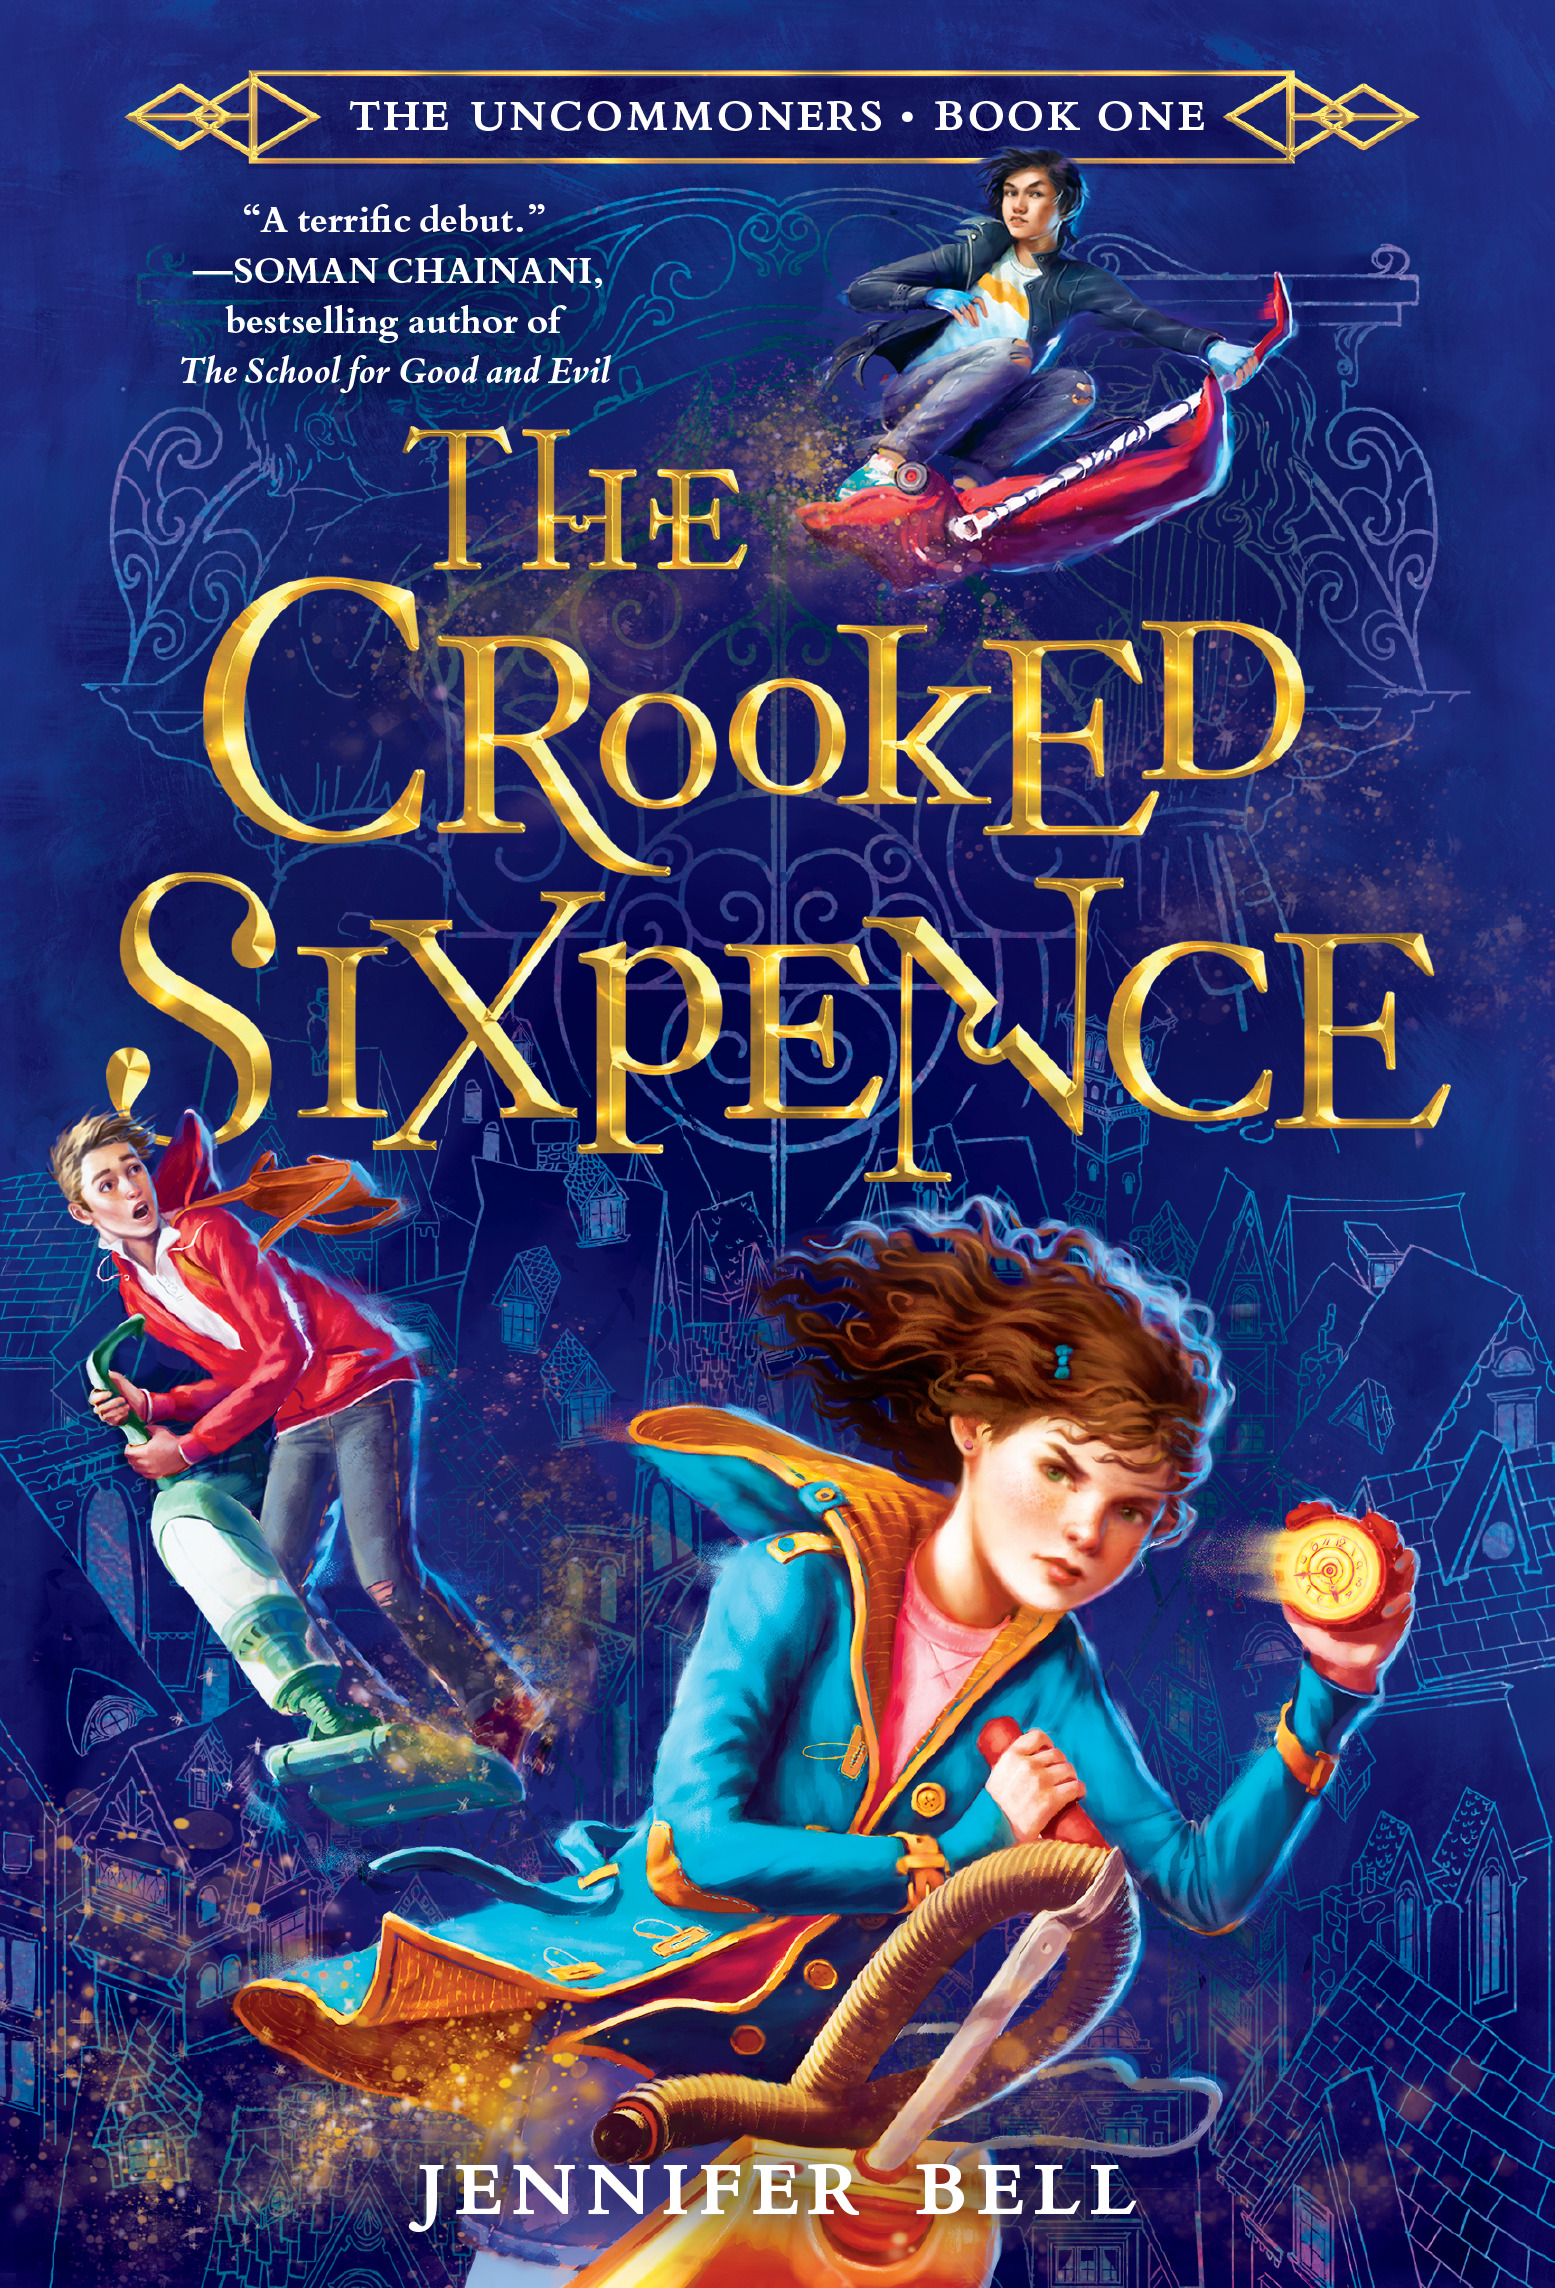 The Uncommoners #1: The Crooked Sixpence | 9-12 years old